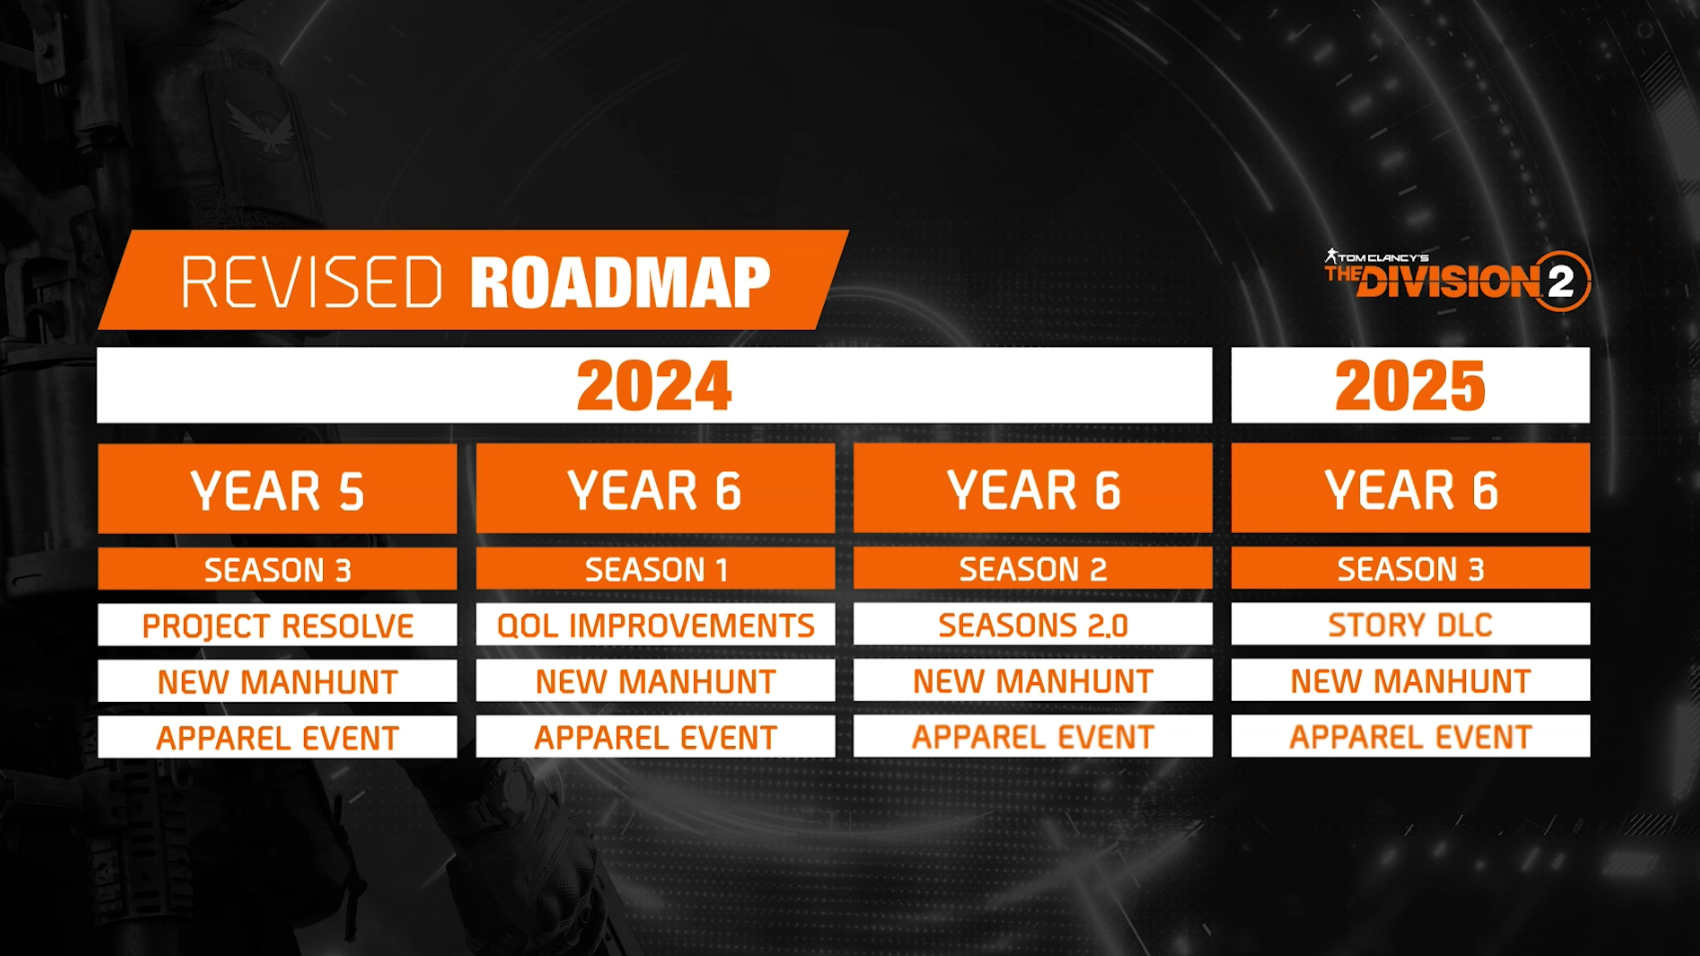 The Division 2 roadmap for 2024 and 2025